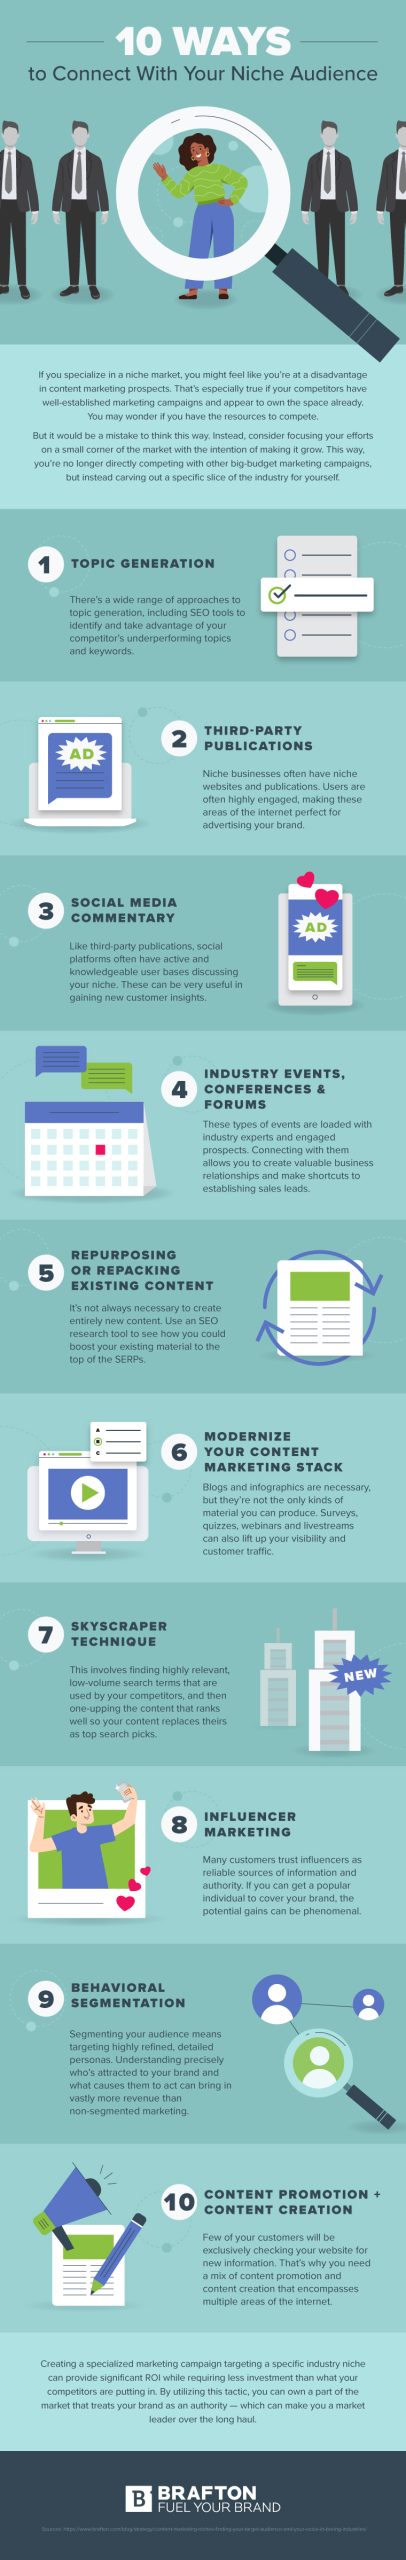 Content niches Infographic